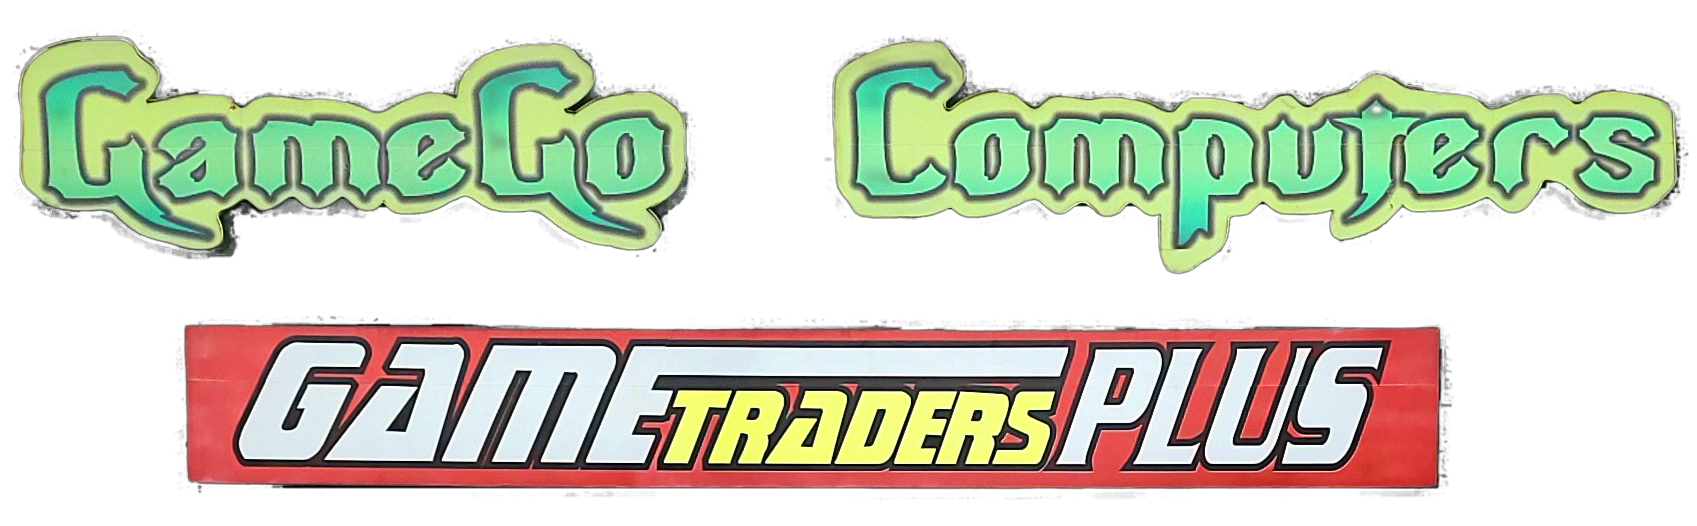 GameGo Computers & Game Traders Plus